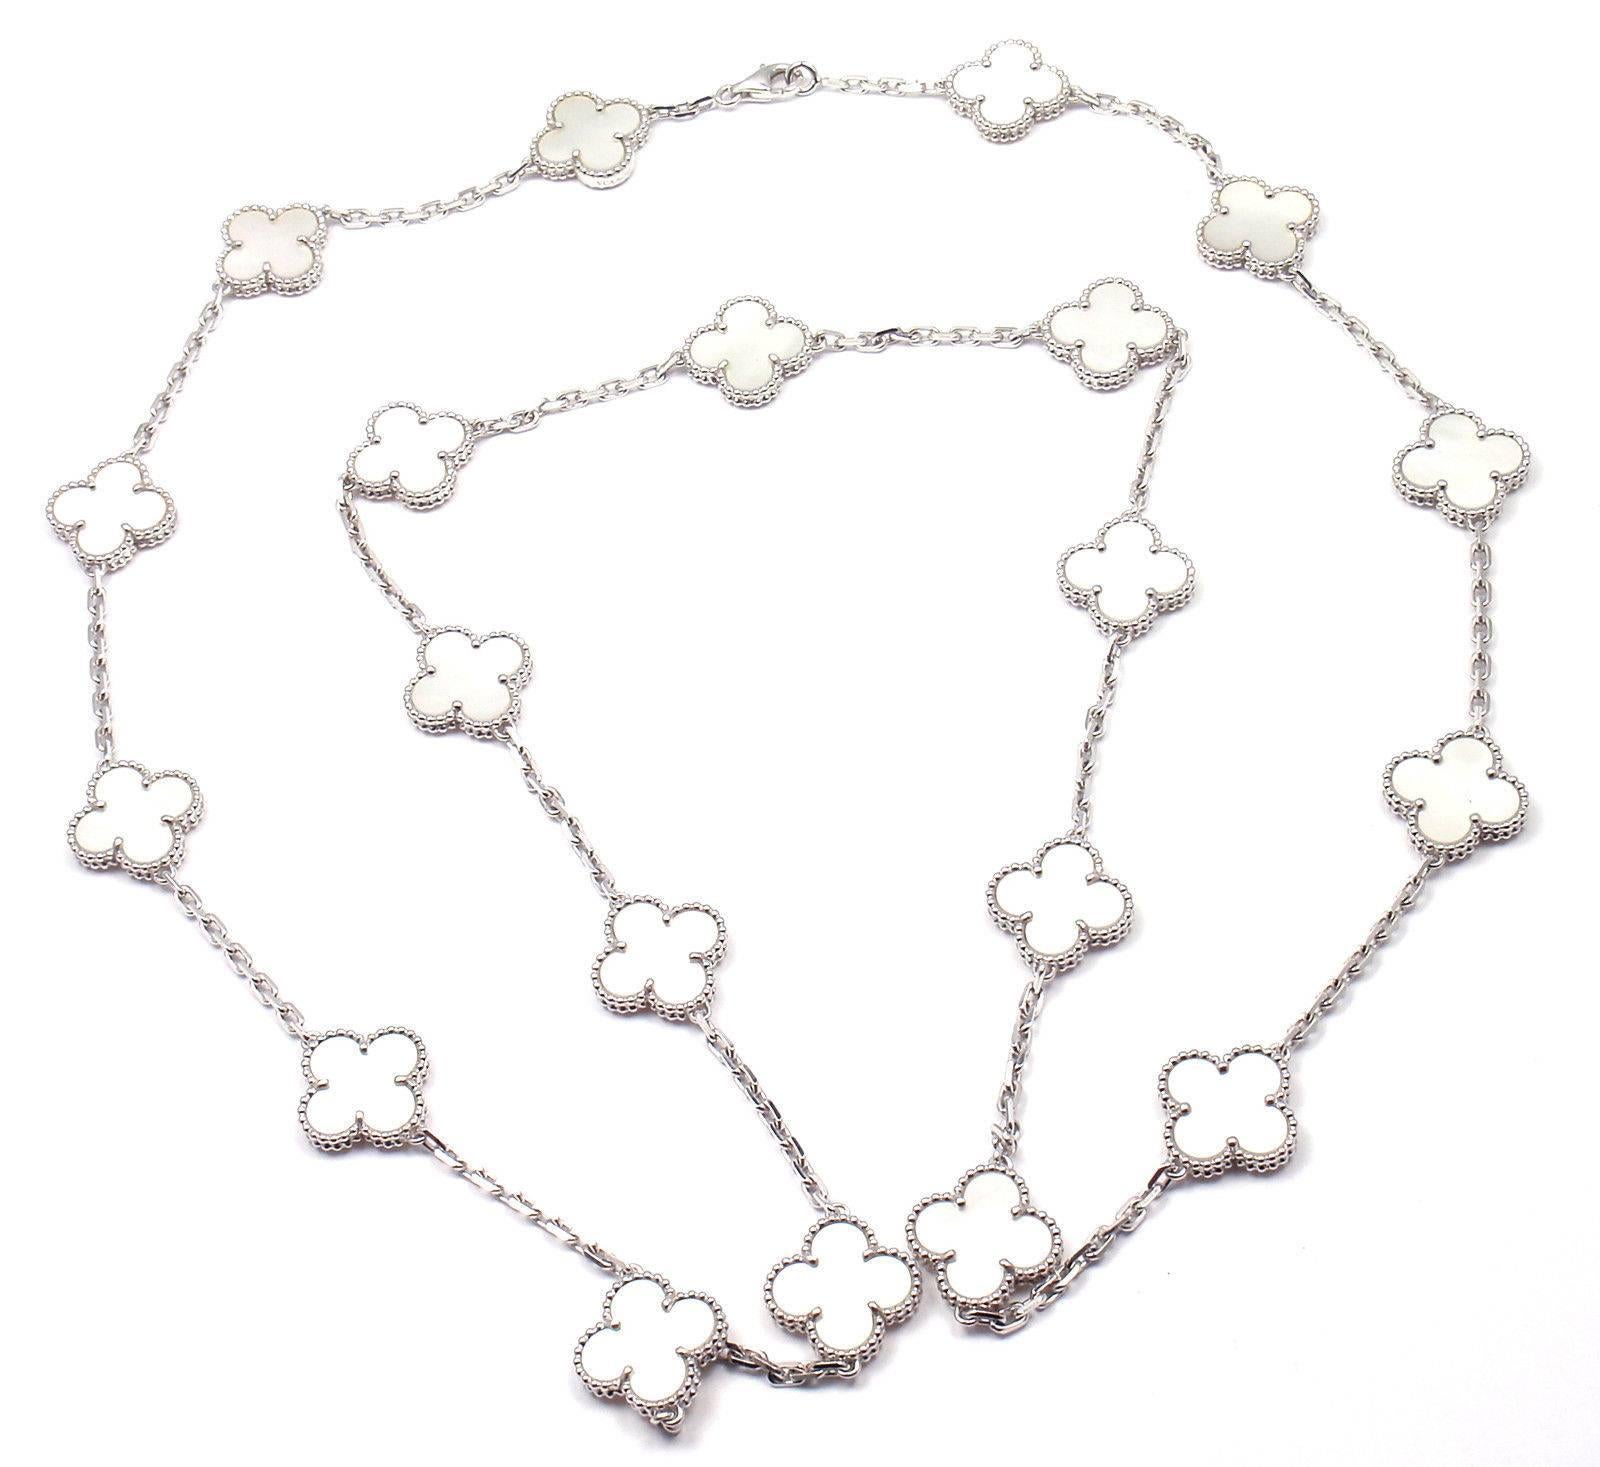 18k White Gold Alhambra 20 Motifs Mother Of Pearl Necklace by Van Cleef & Arpels. 
With 20 motifs of mother of pearl Alhambra stones 15mm each 
This necklace comes with Van Cleef & Arpels certificate.  
Details: 
Length: 33.5